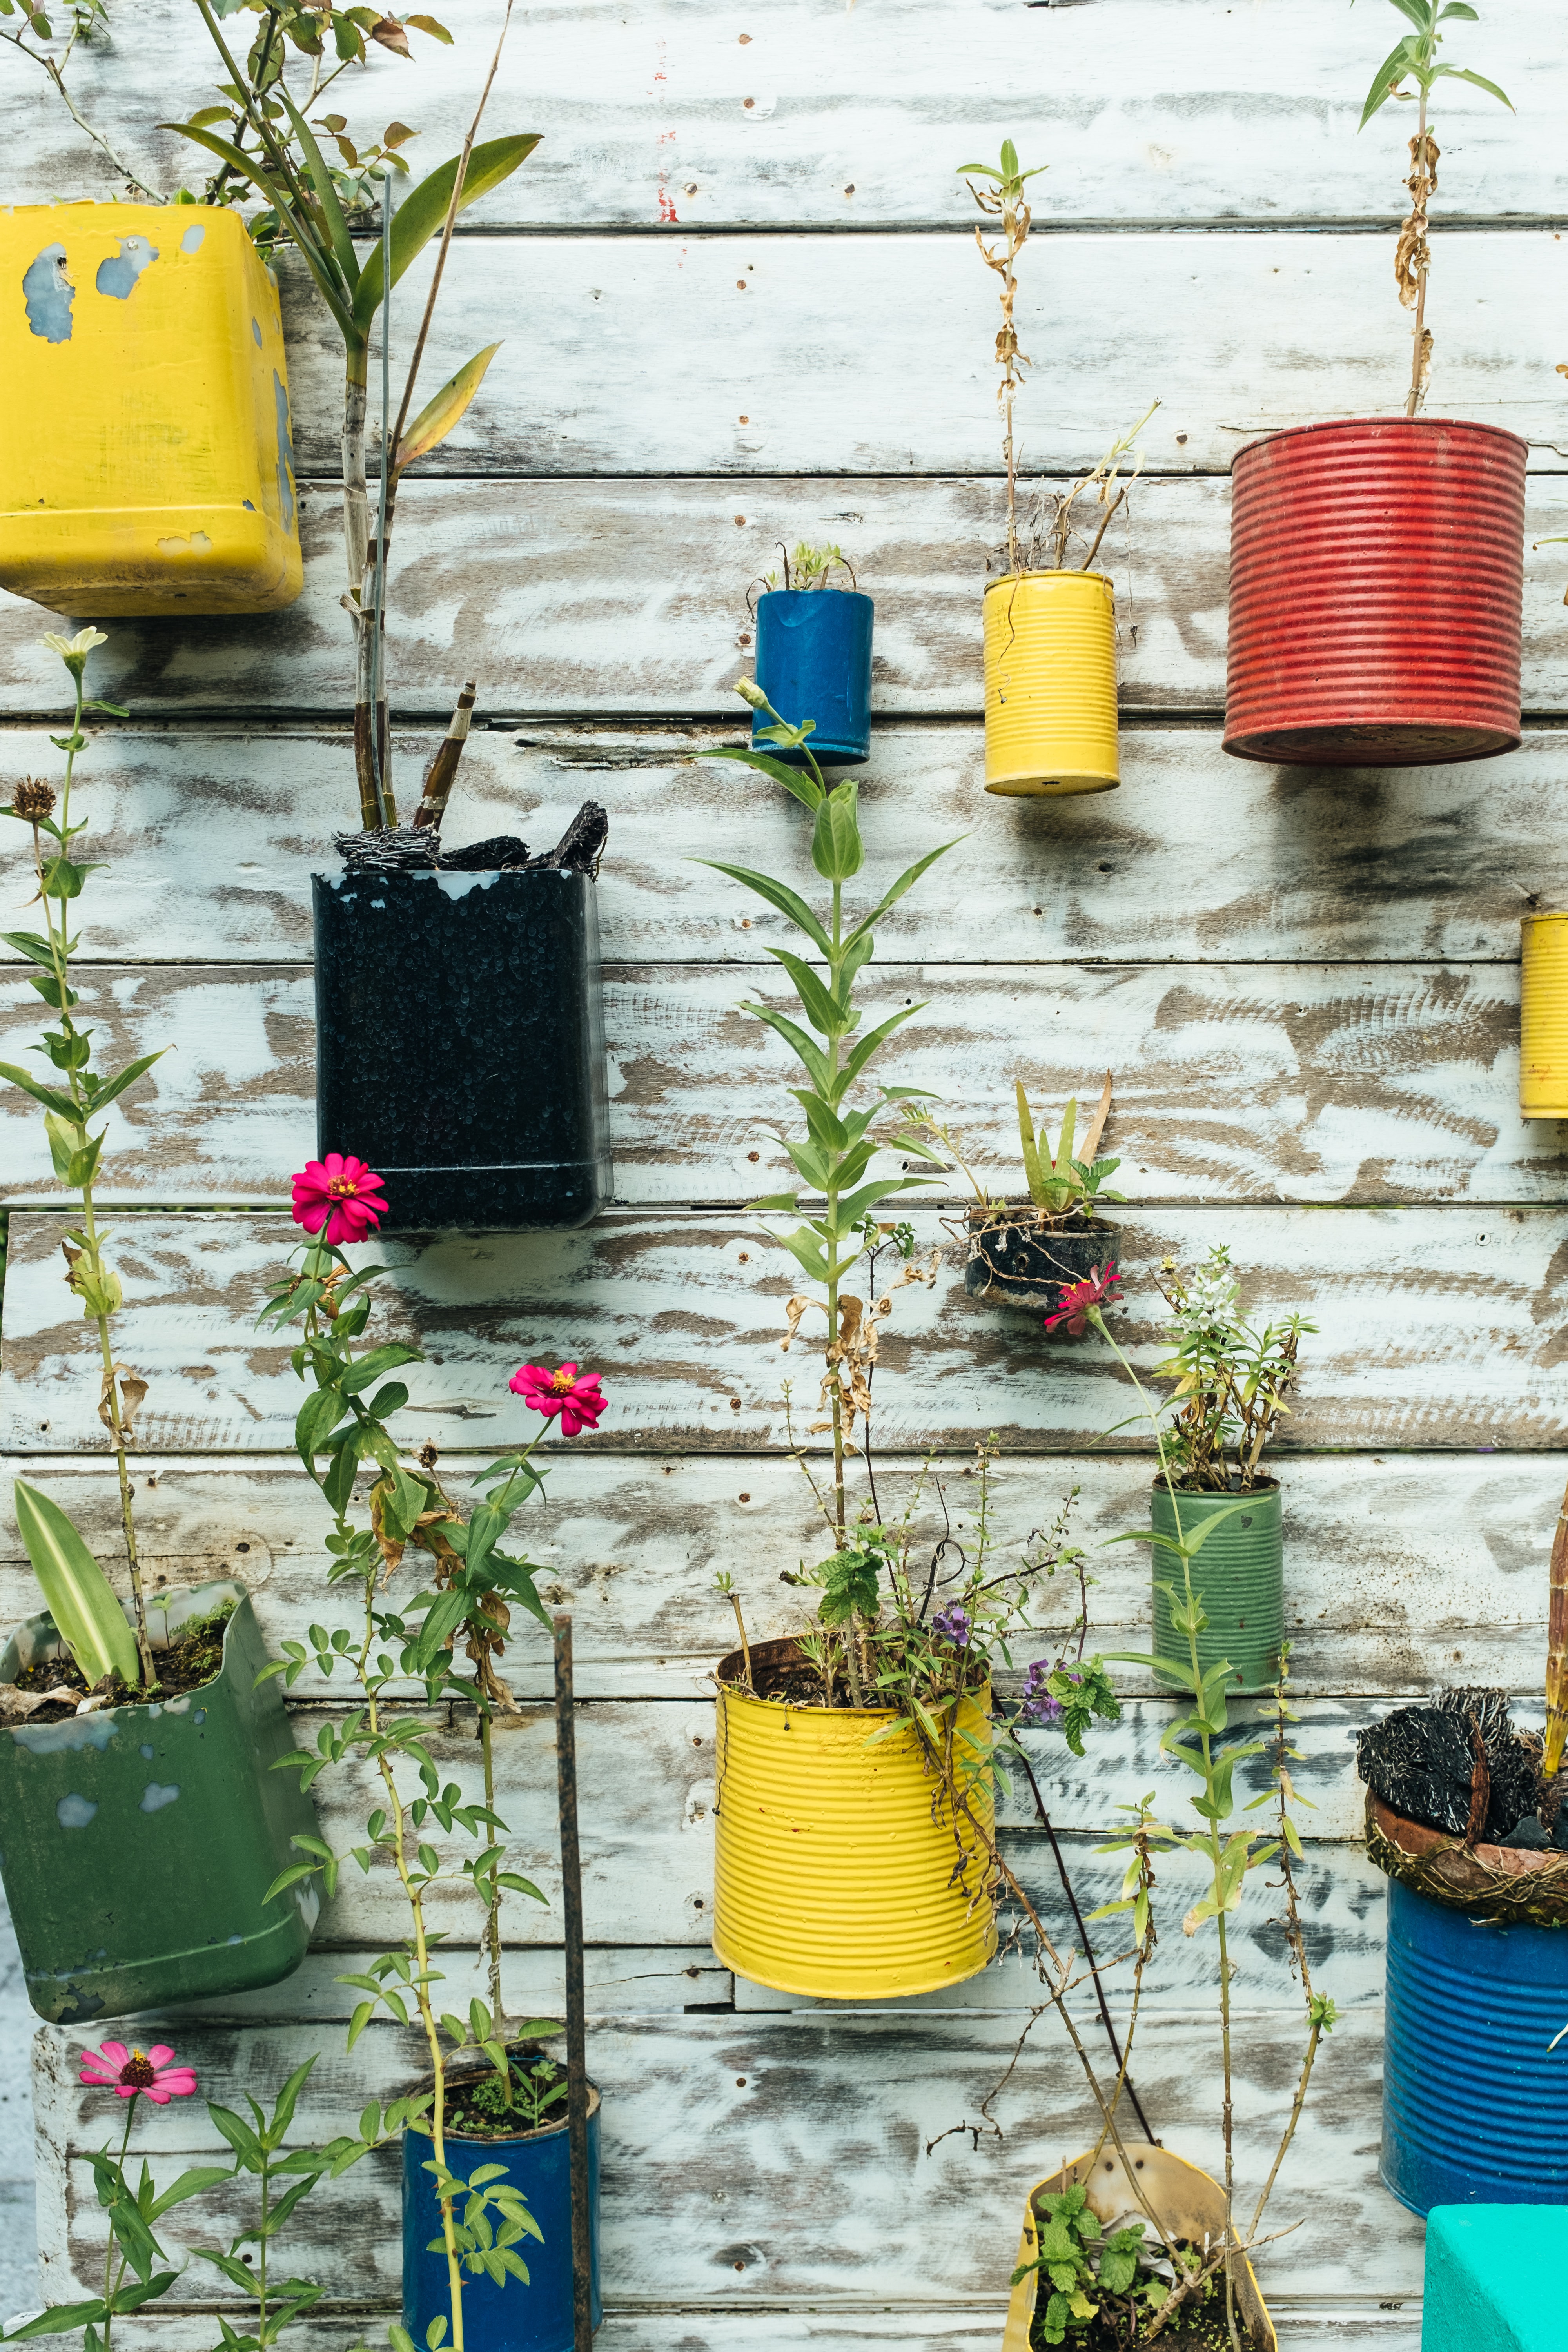 reused coffee cans painted bright colors, stuck to the wall and used and pots for plants